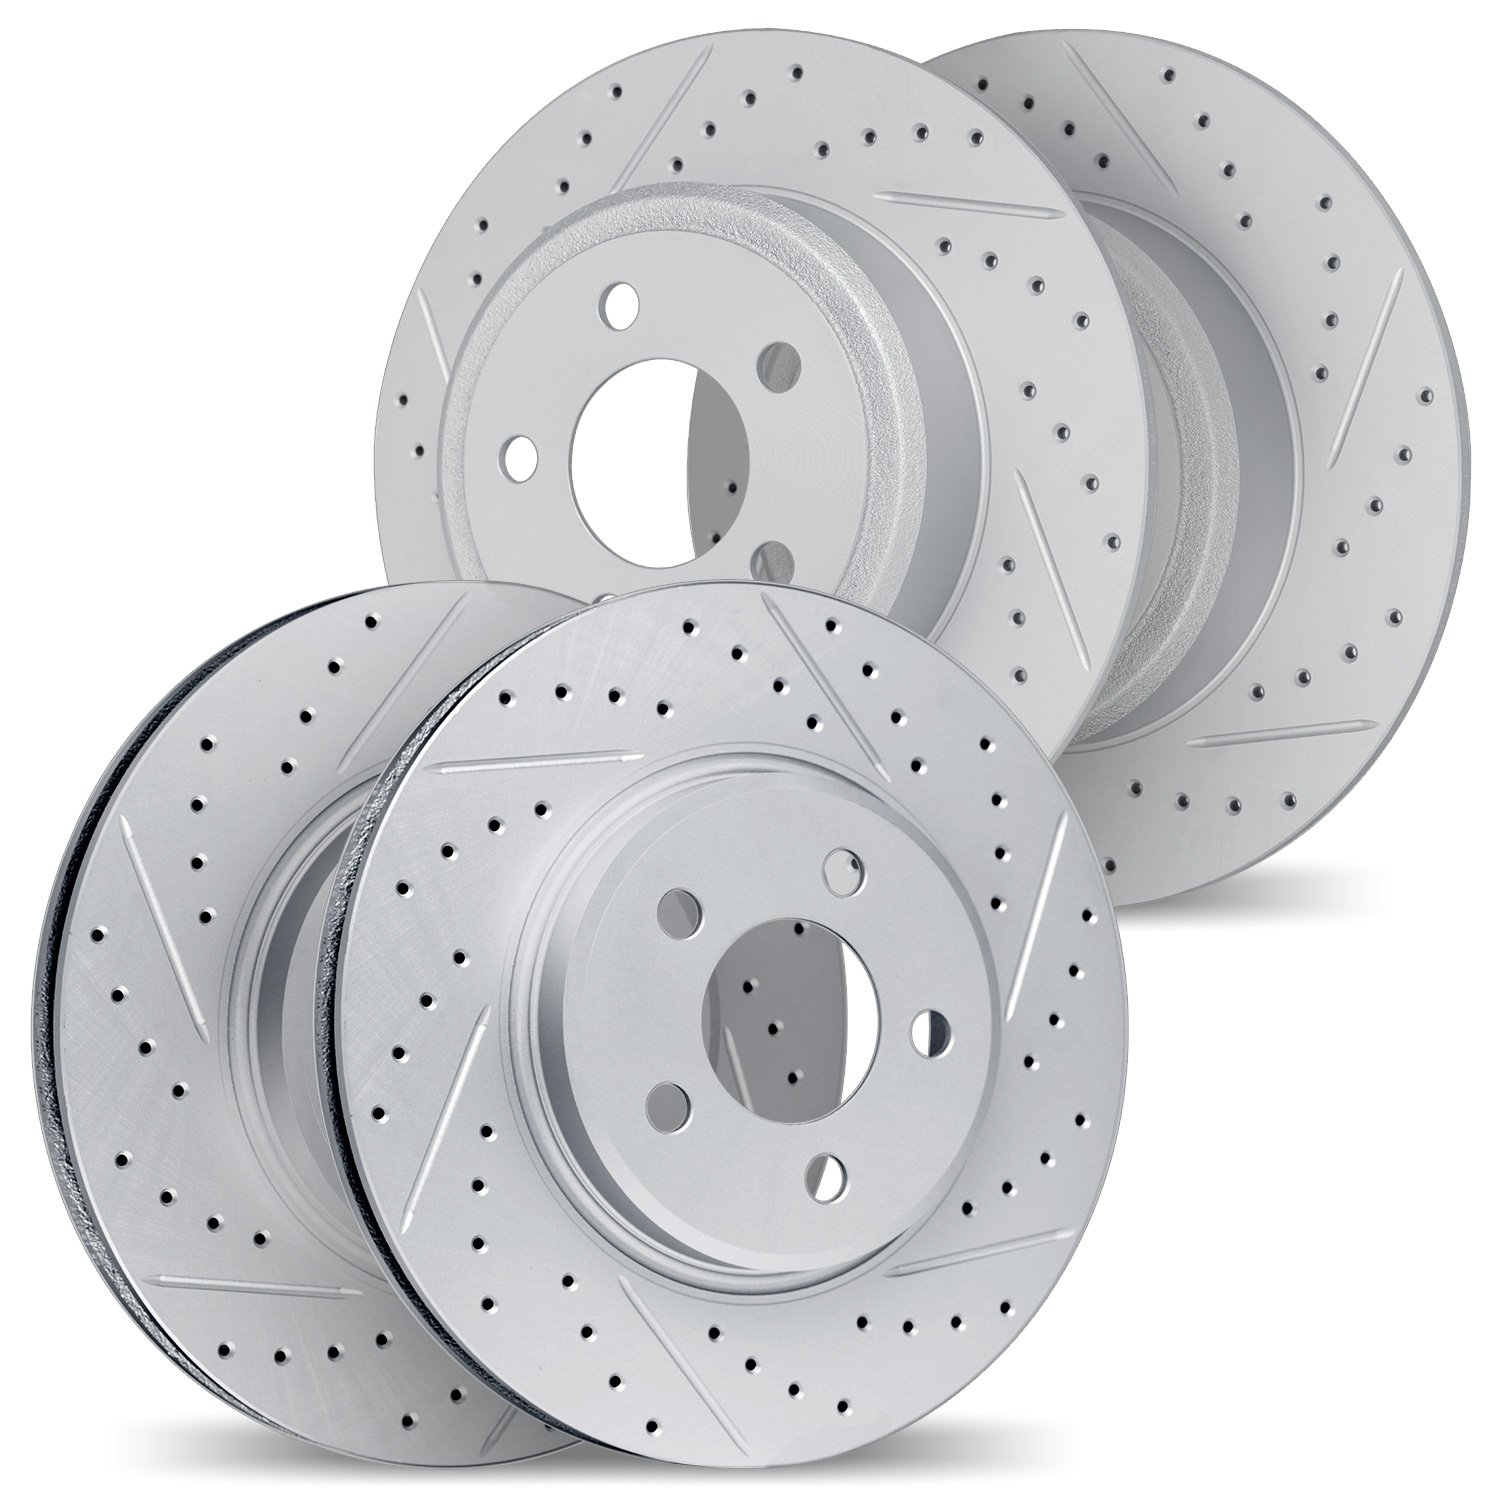 2004-56000 Geoperformance Drilled/Slotted Brake Rotors, 1996-1997 Ford/Lincoln/Mercury/Mazda, Position: Front and Rear